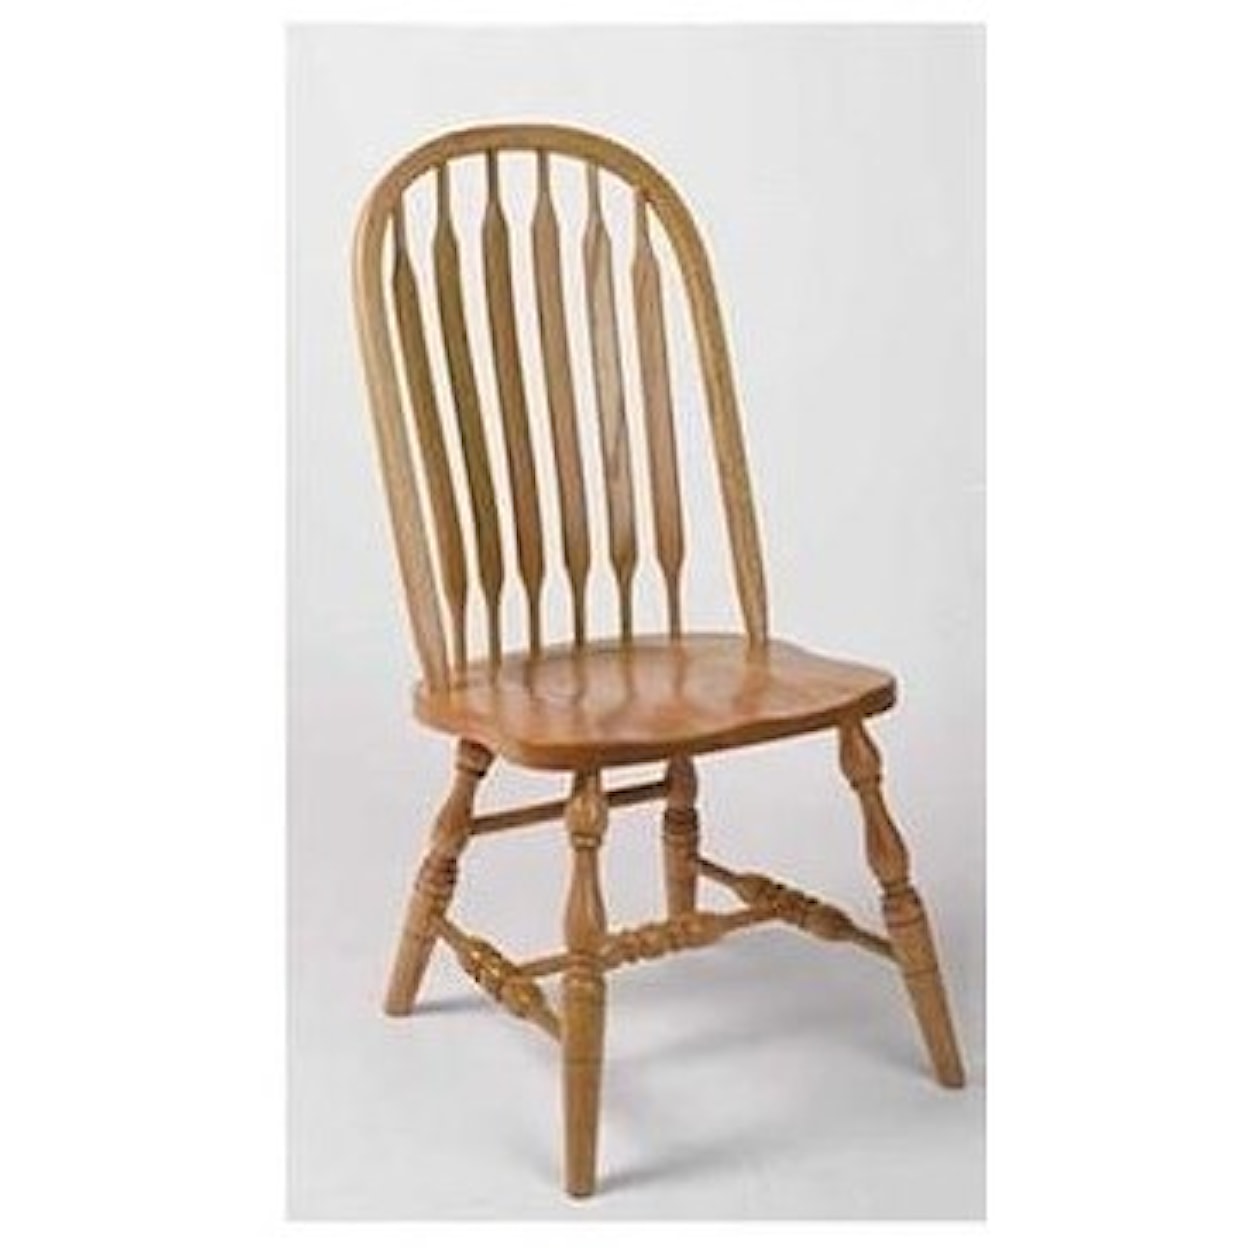 Horseshoe Bend Bent Paddle Deluxe Bent Paddle High Back Side Chair